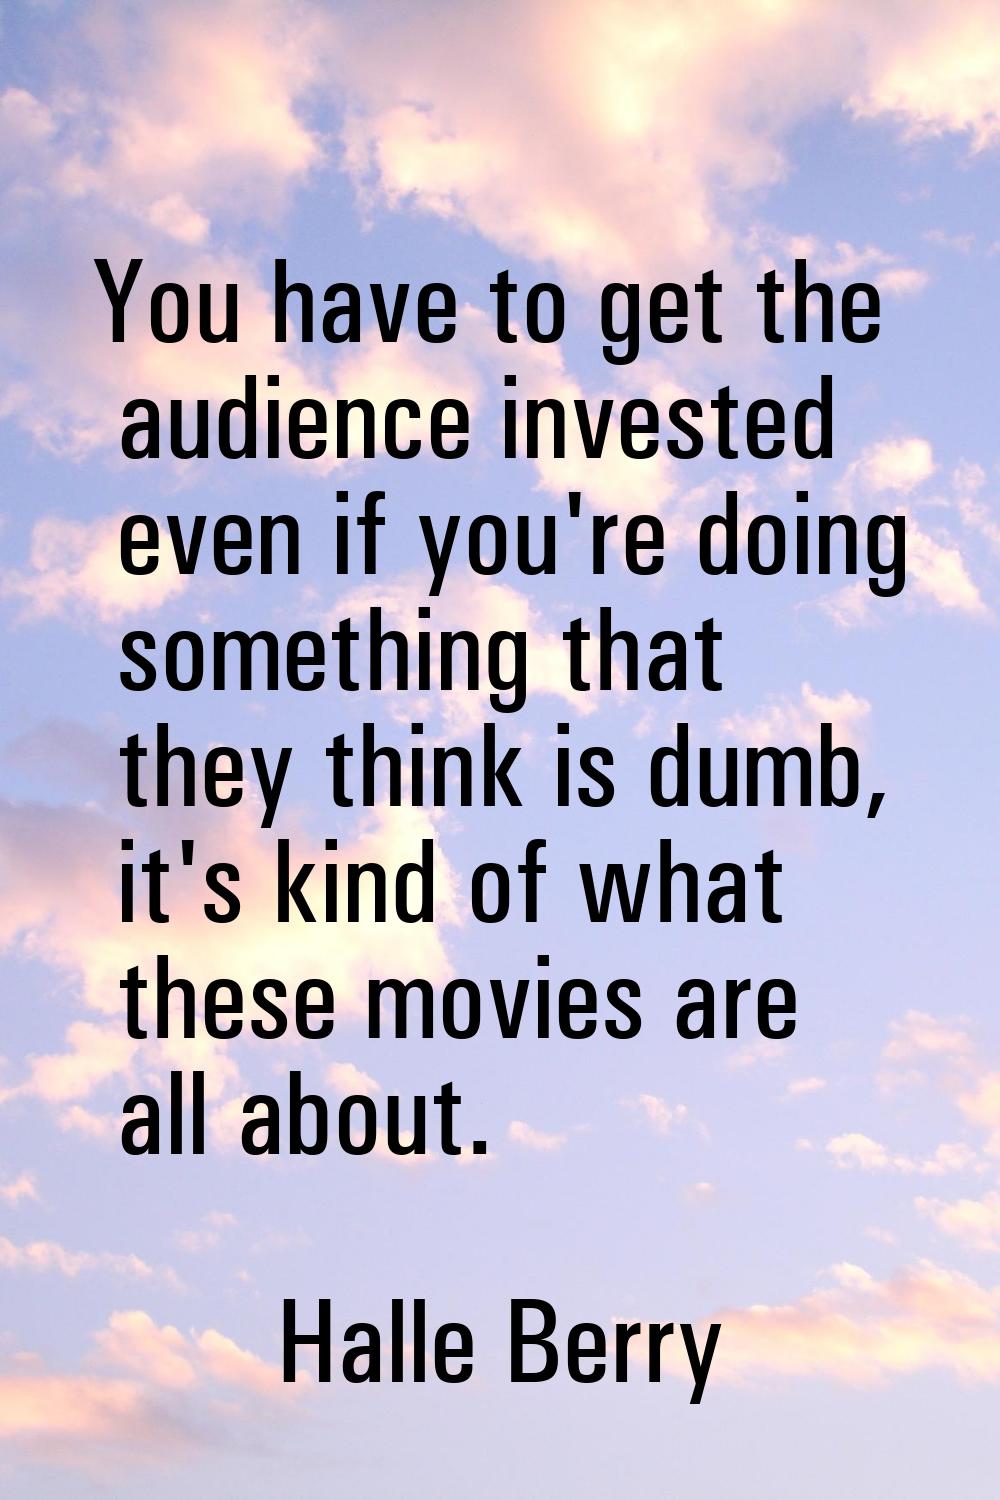 You have to get the audience invested even if you're doing something that they think is dumb, it's 